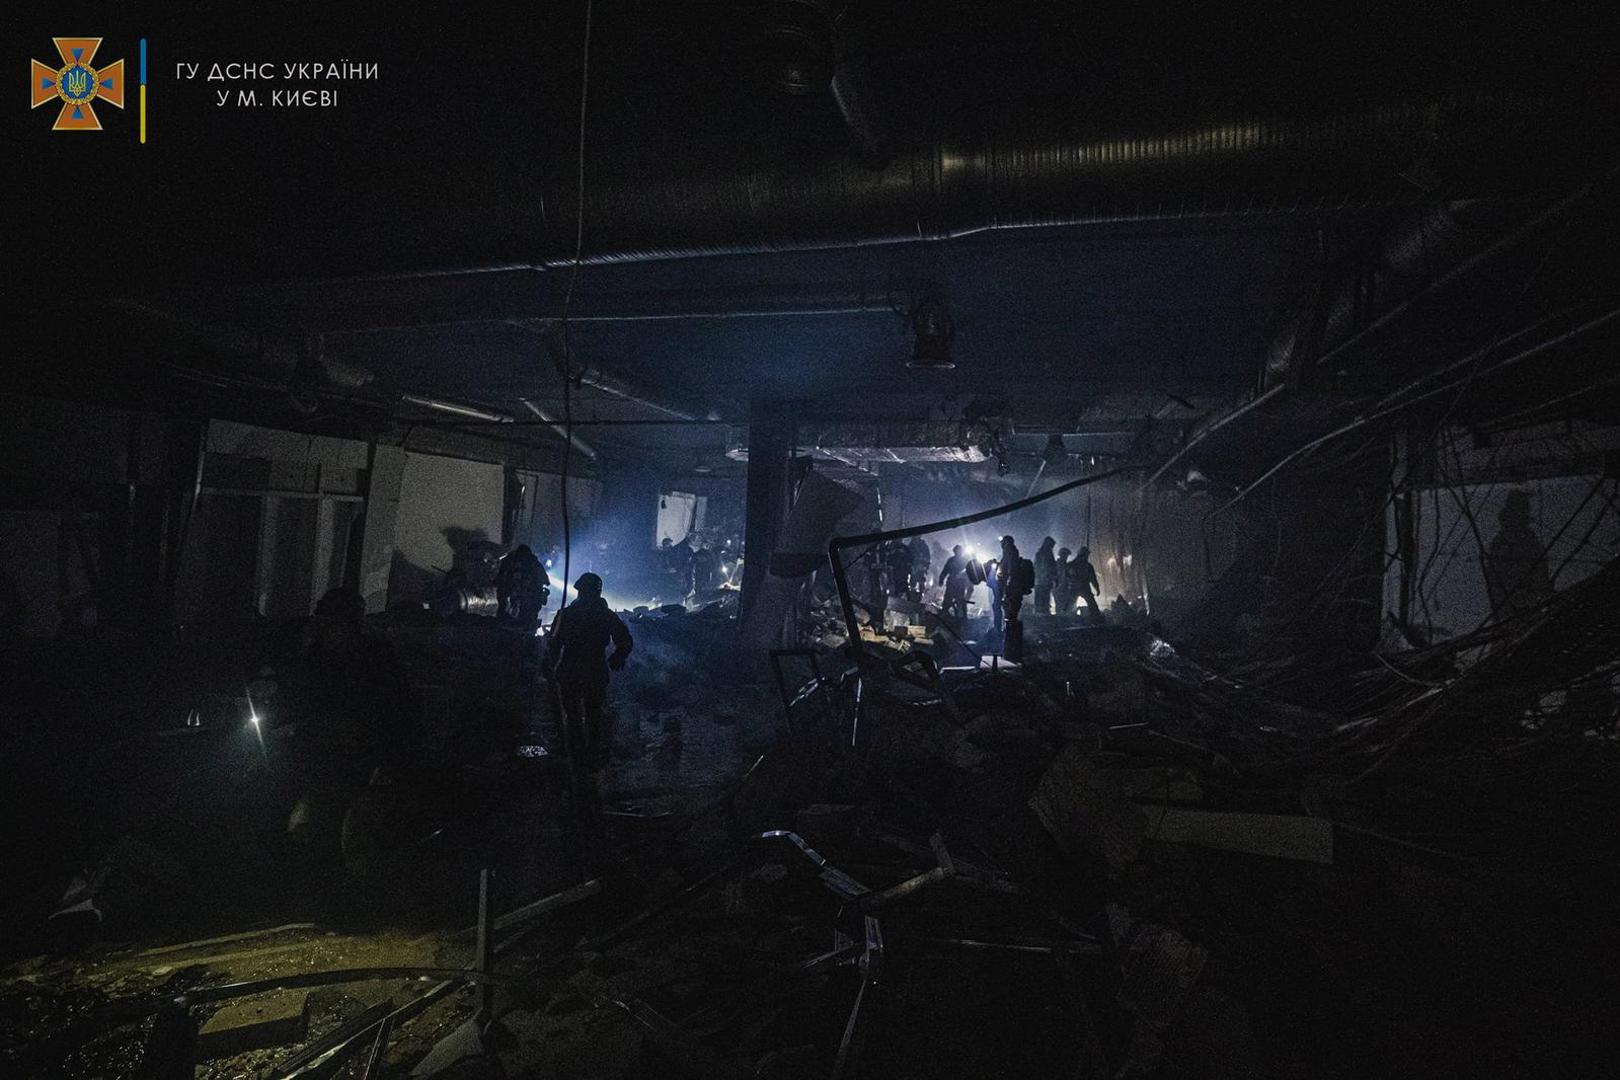 Rescuers work at the site of a shopping mall damaged by an airstrike, as Russia's attack on Ukraine continues, in Kyiv, Ukraine, in this handout picture released March 21, 2022.  Press service of the State Emergency Service of Ukraine/Handout via REUTERS ATTENTION EDITORS - THIS IMAGE HAS BEEN SUPPLIED BY A THIRD PARTY. Photo: State Emergency Service/REUTERS